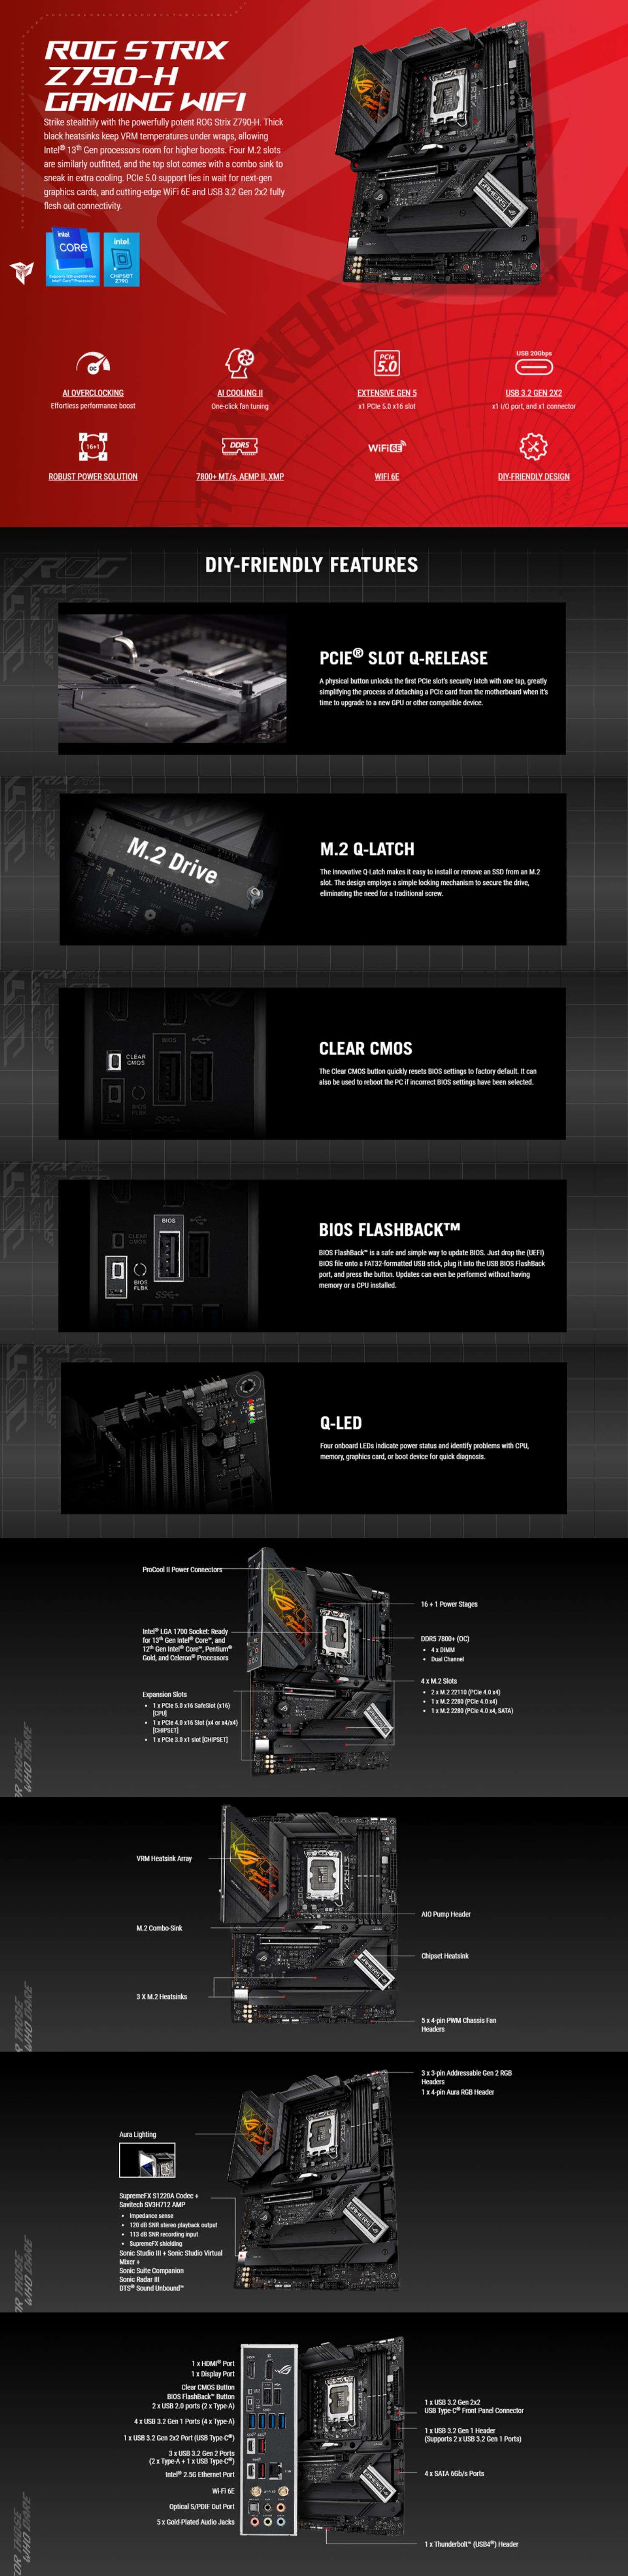 A large marketing image providing additional information about the product ASUS ROG STRIX Z790-H Gaming WiFi LGA1700 ATX Desktop Motherboard - Additional alt info not provided